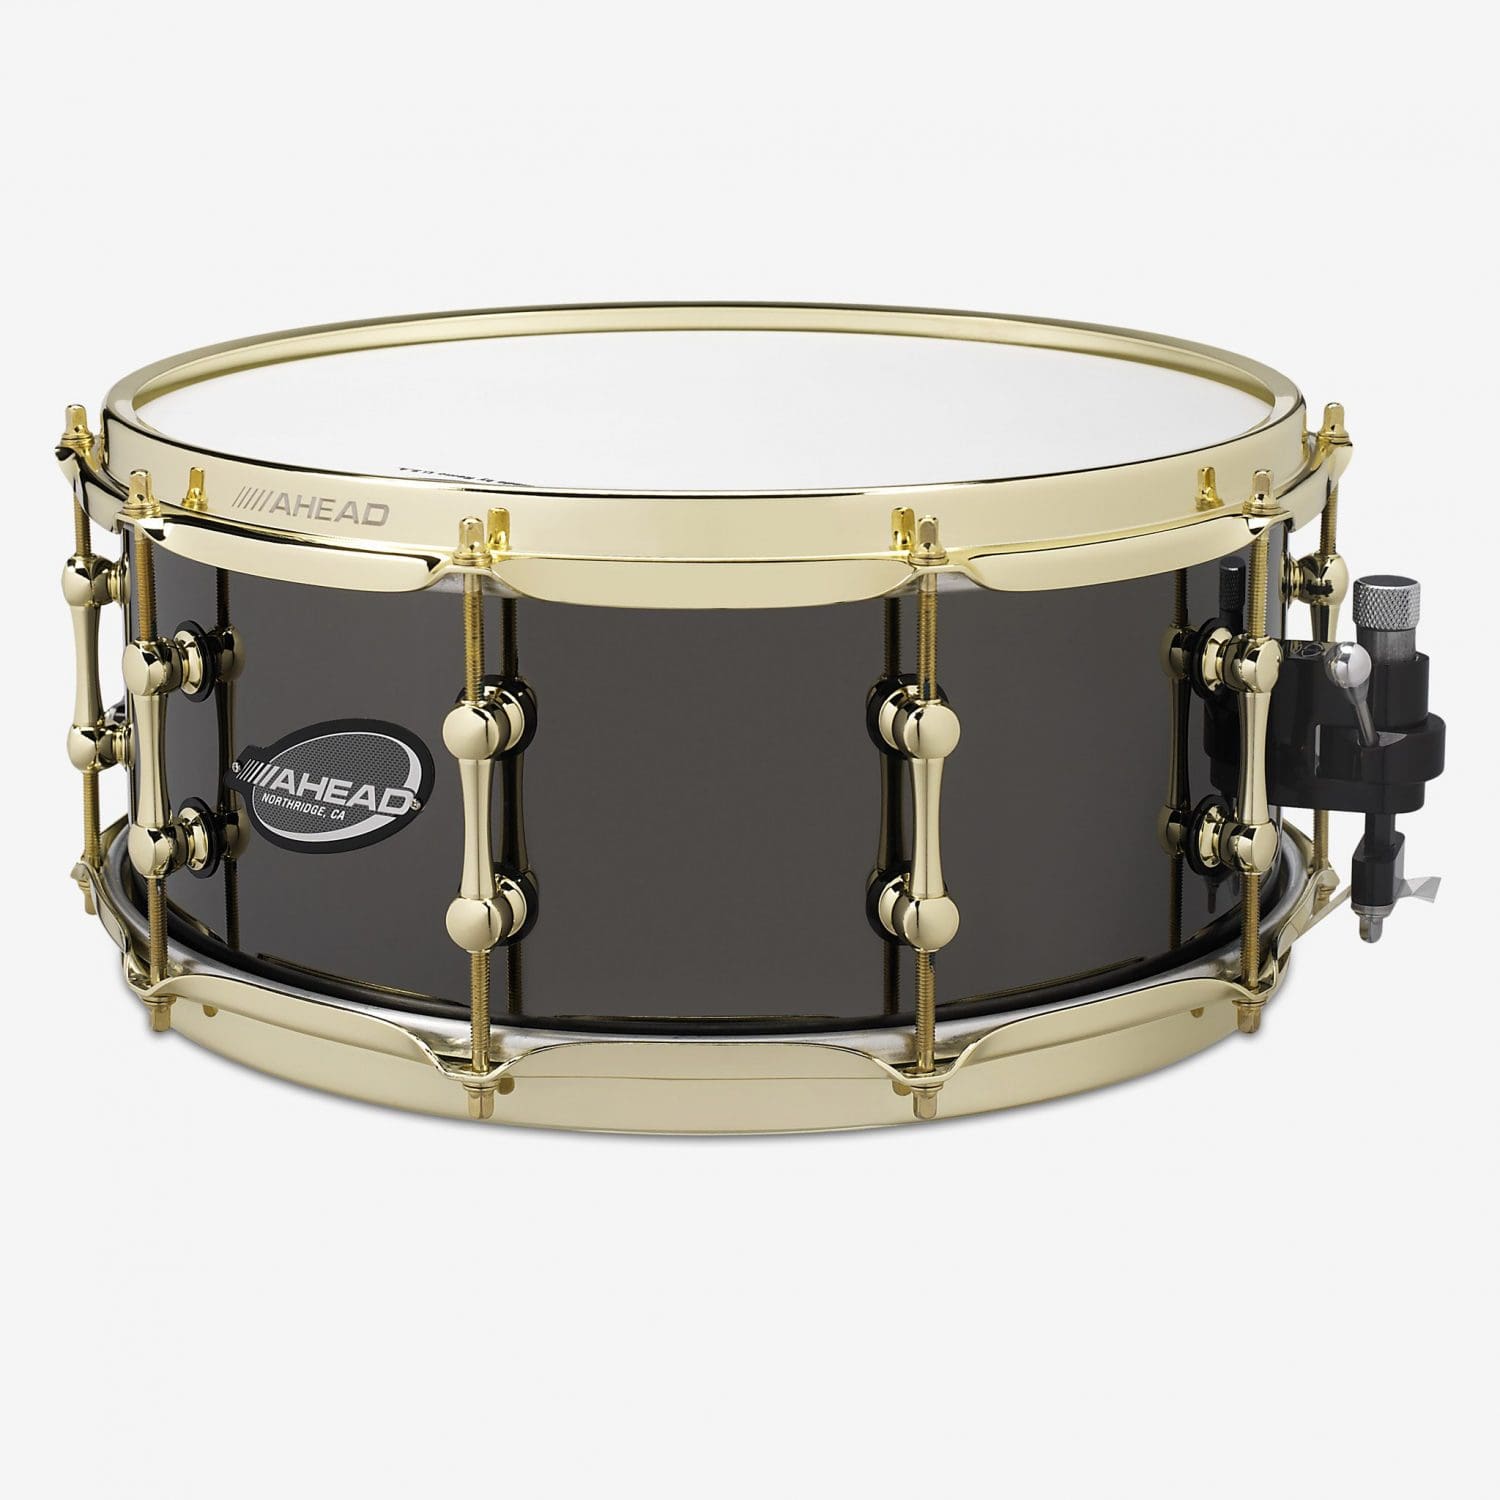 Black Chrome on Bell Brass Snare Drum with Black Trick Throw Off